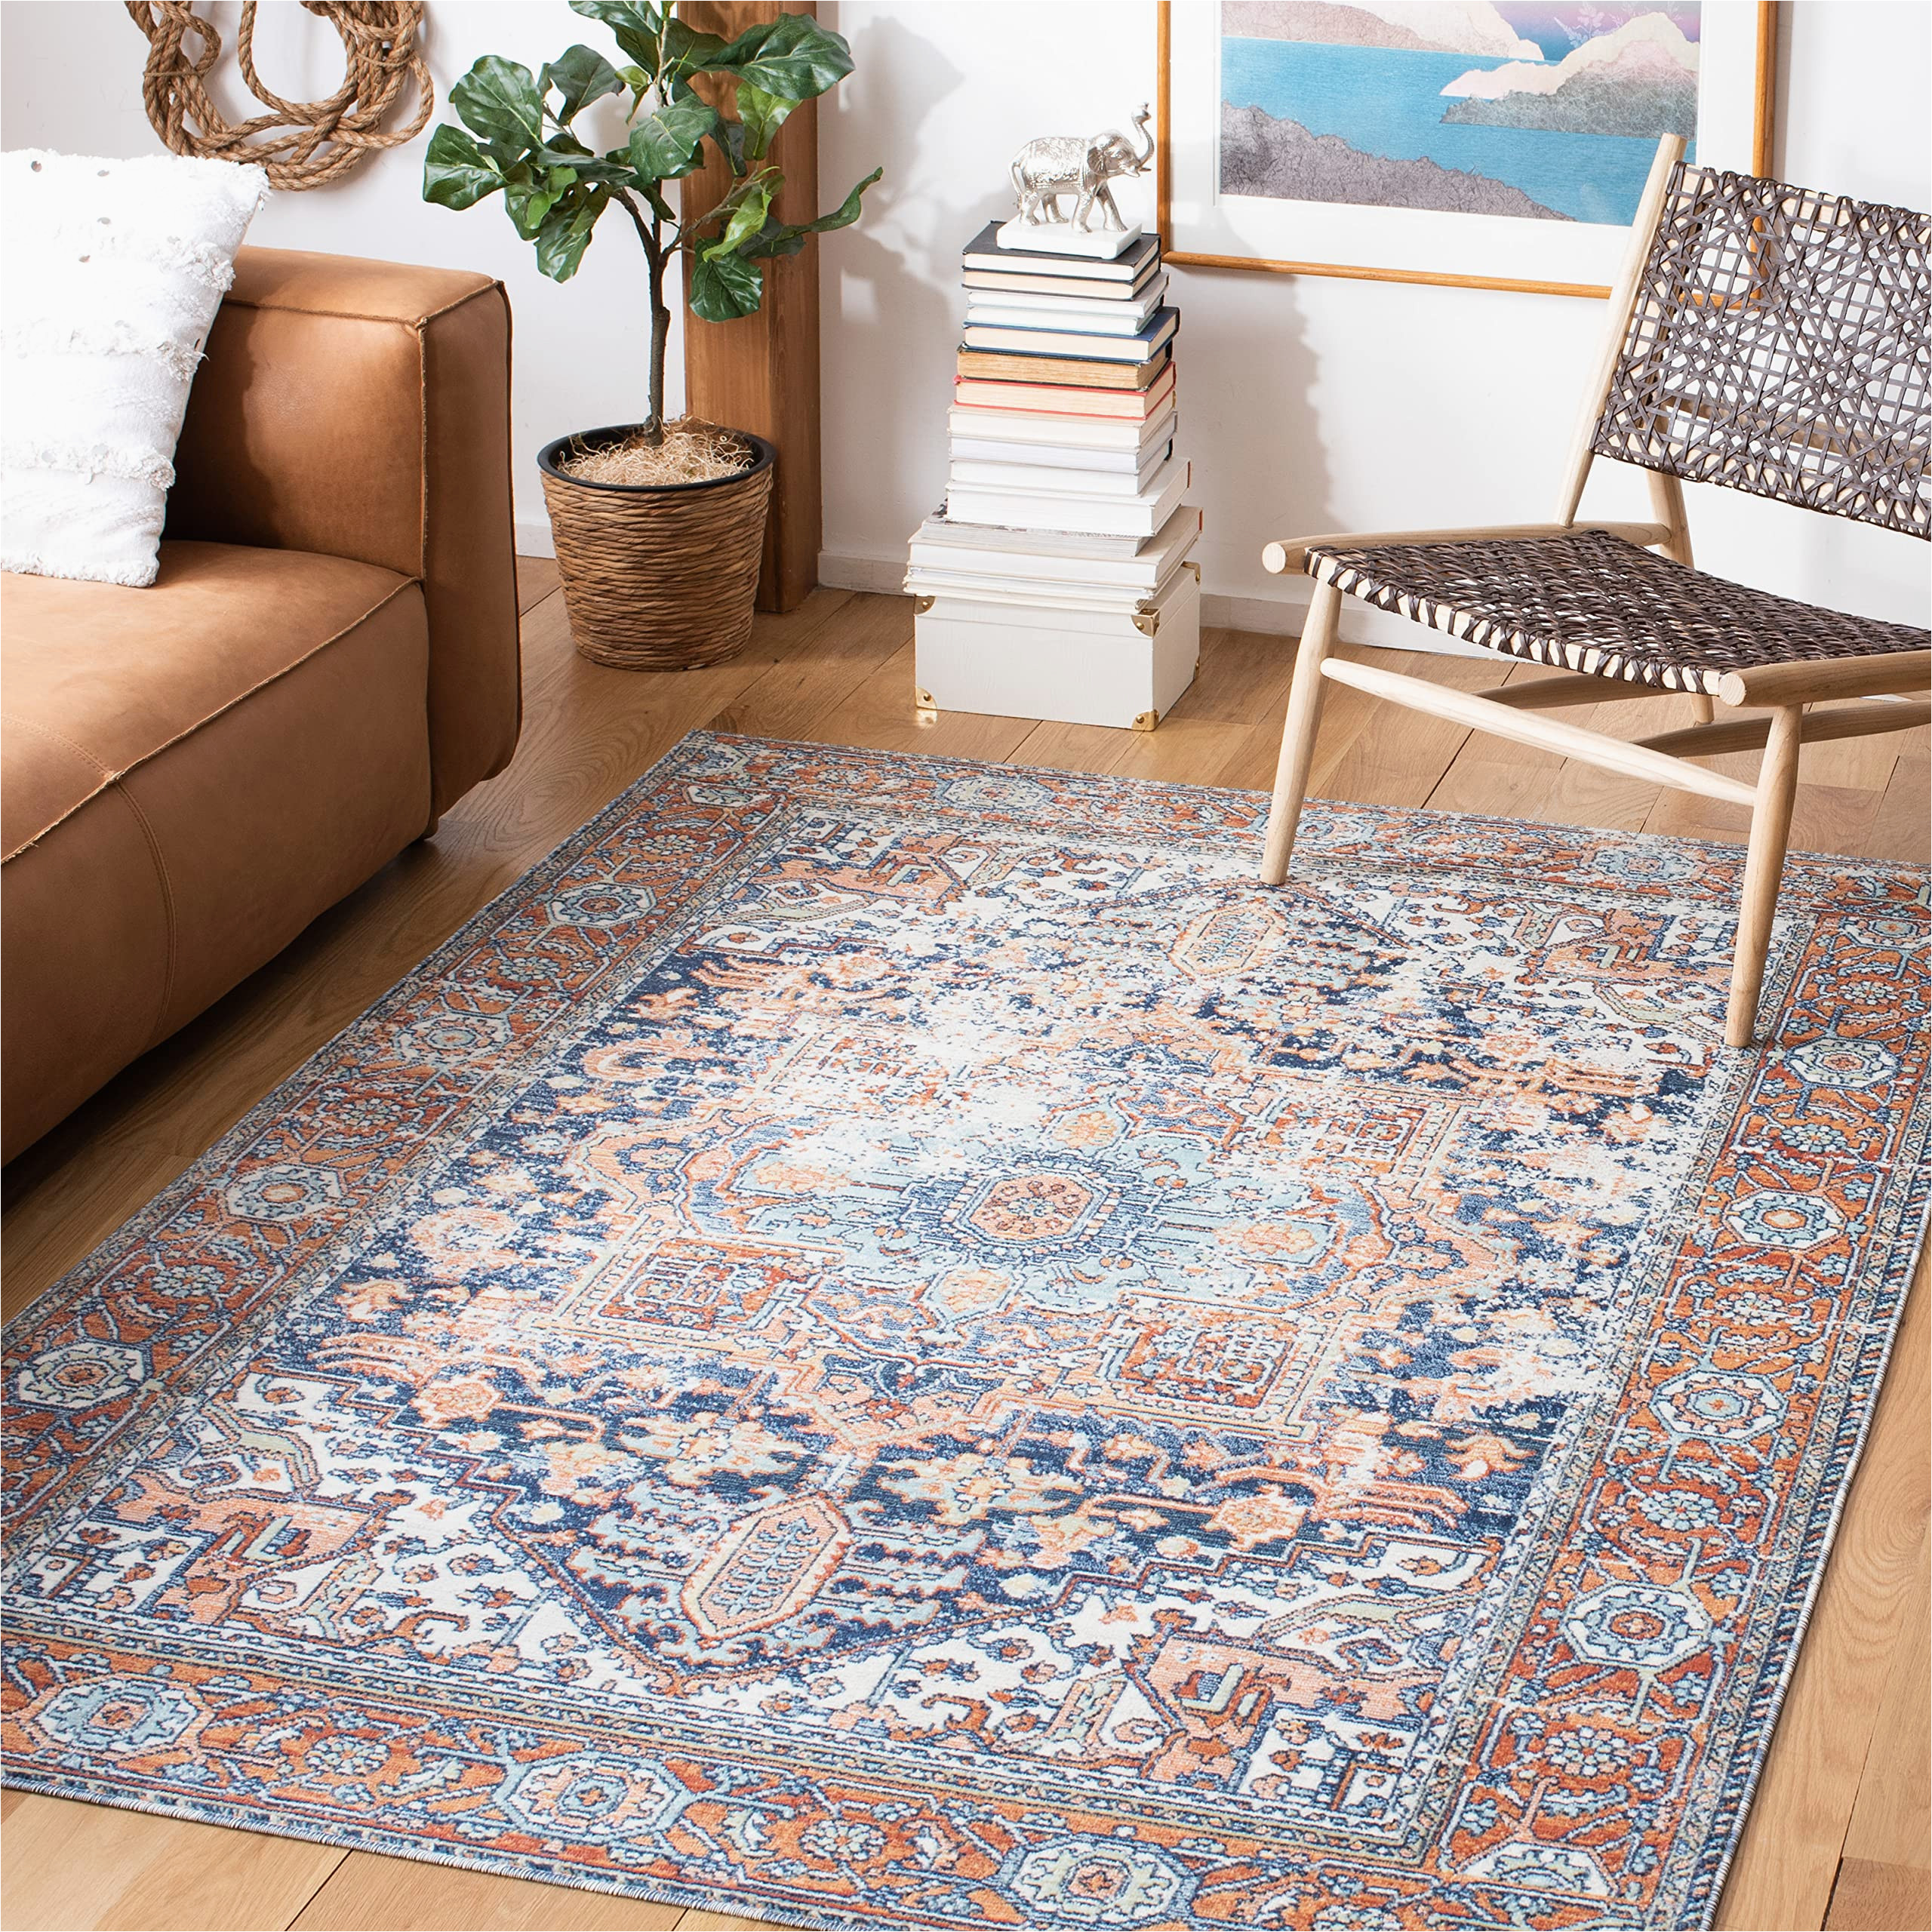 Navy and Rust area Rug Safavieh Aria Collection 8′ X 10′ Navy/rust Ara580n oriental Medallion Distressed Non-shedding Living Room Dining Bedroom area Rug